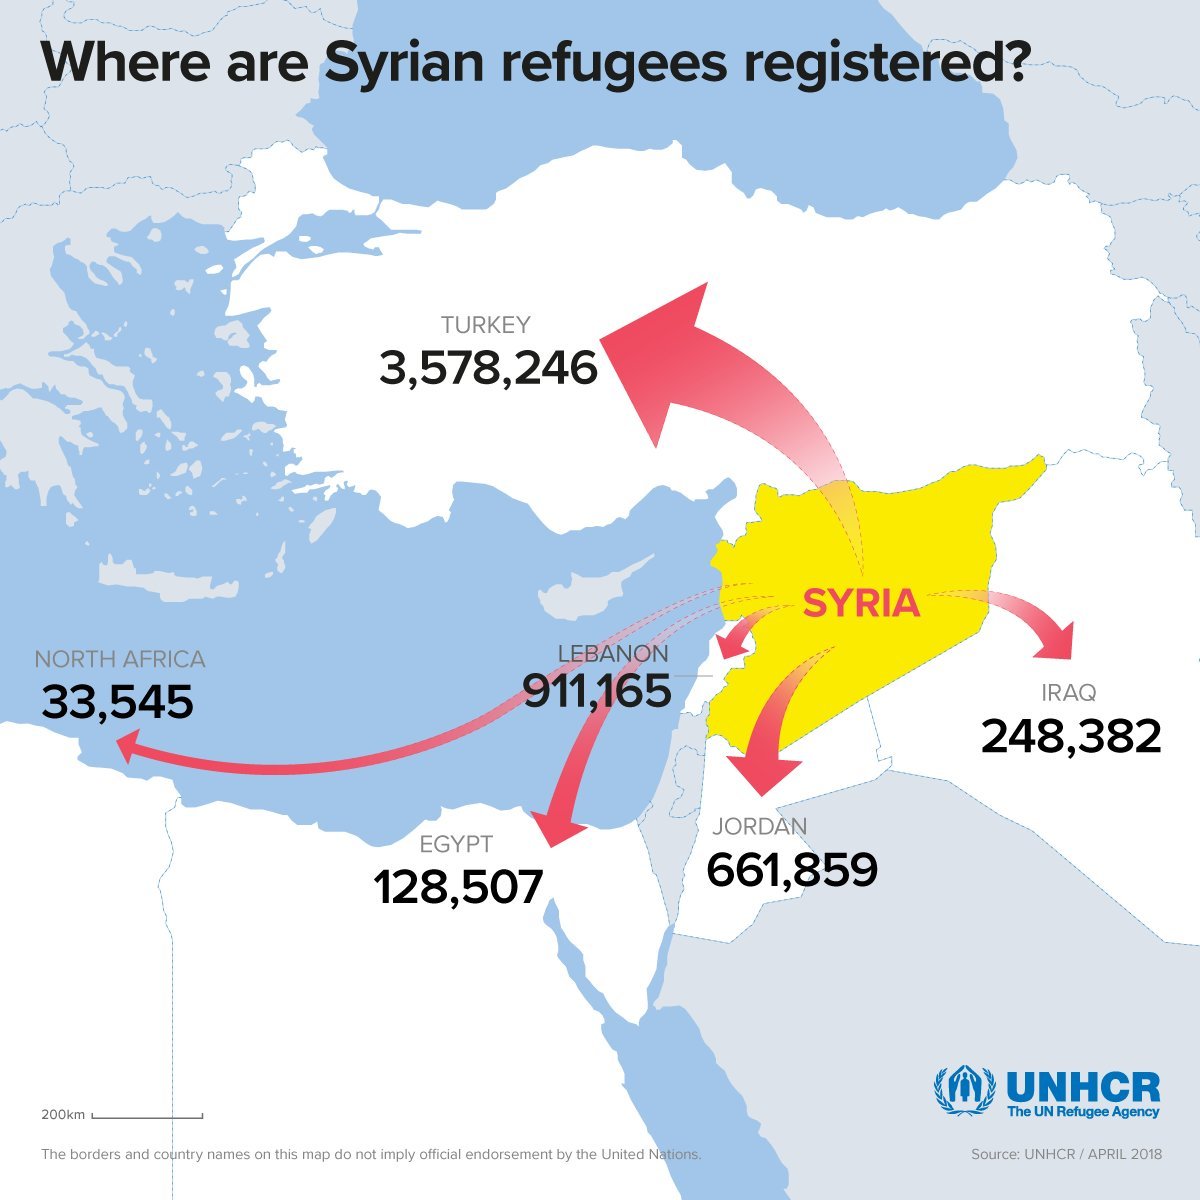 Where are Syrian refugees registered?